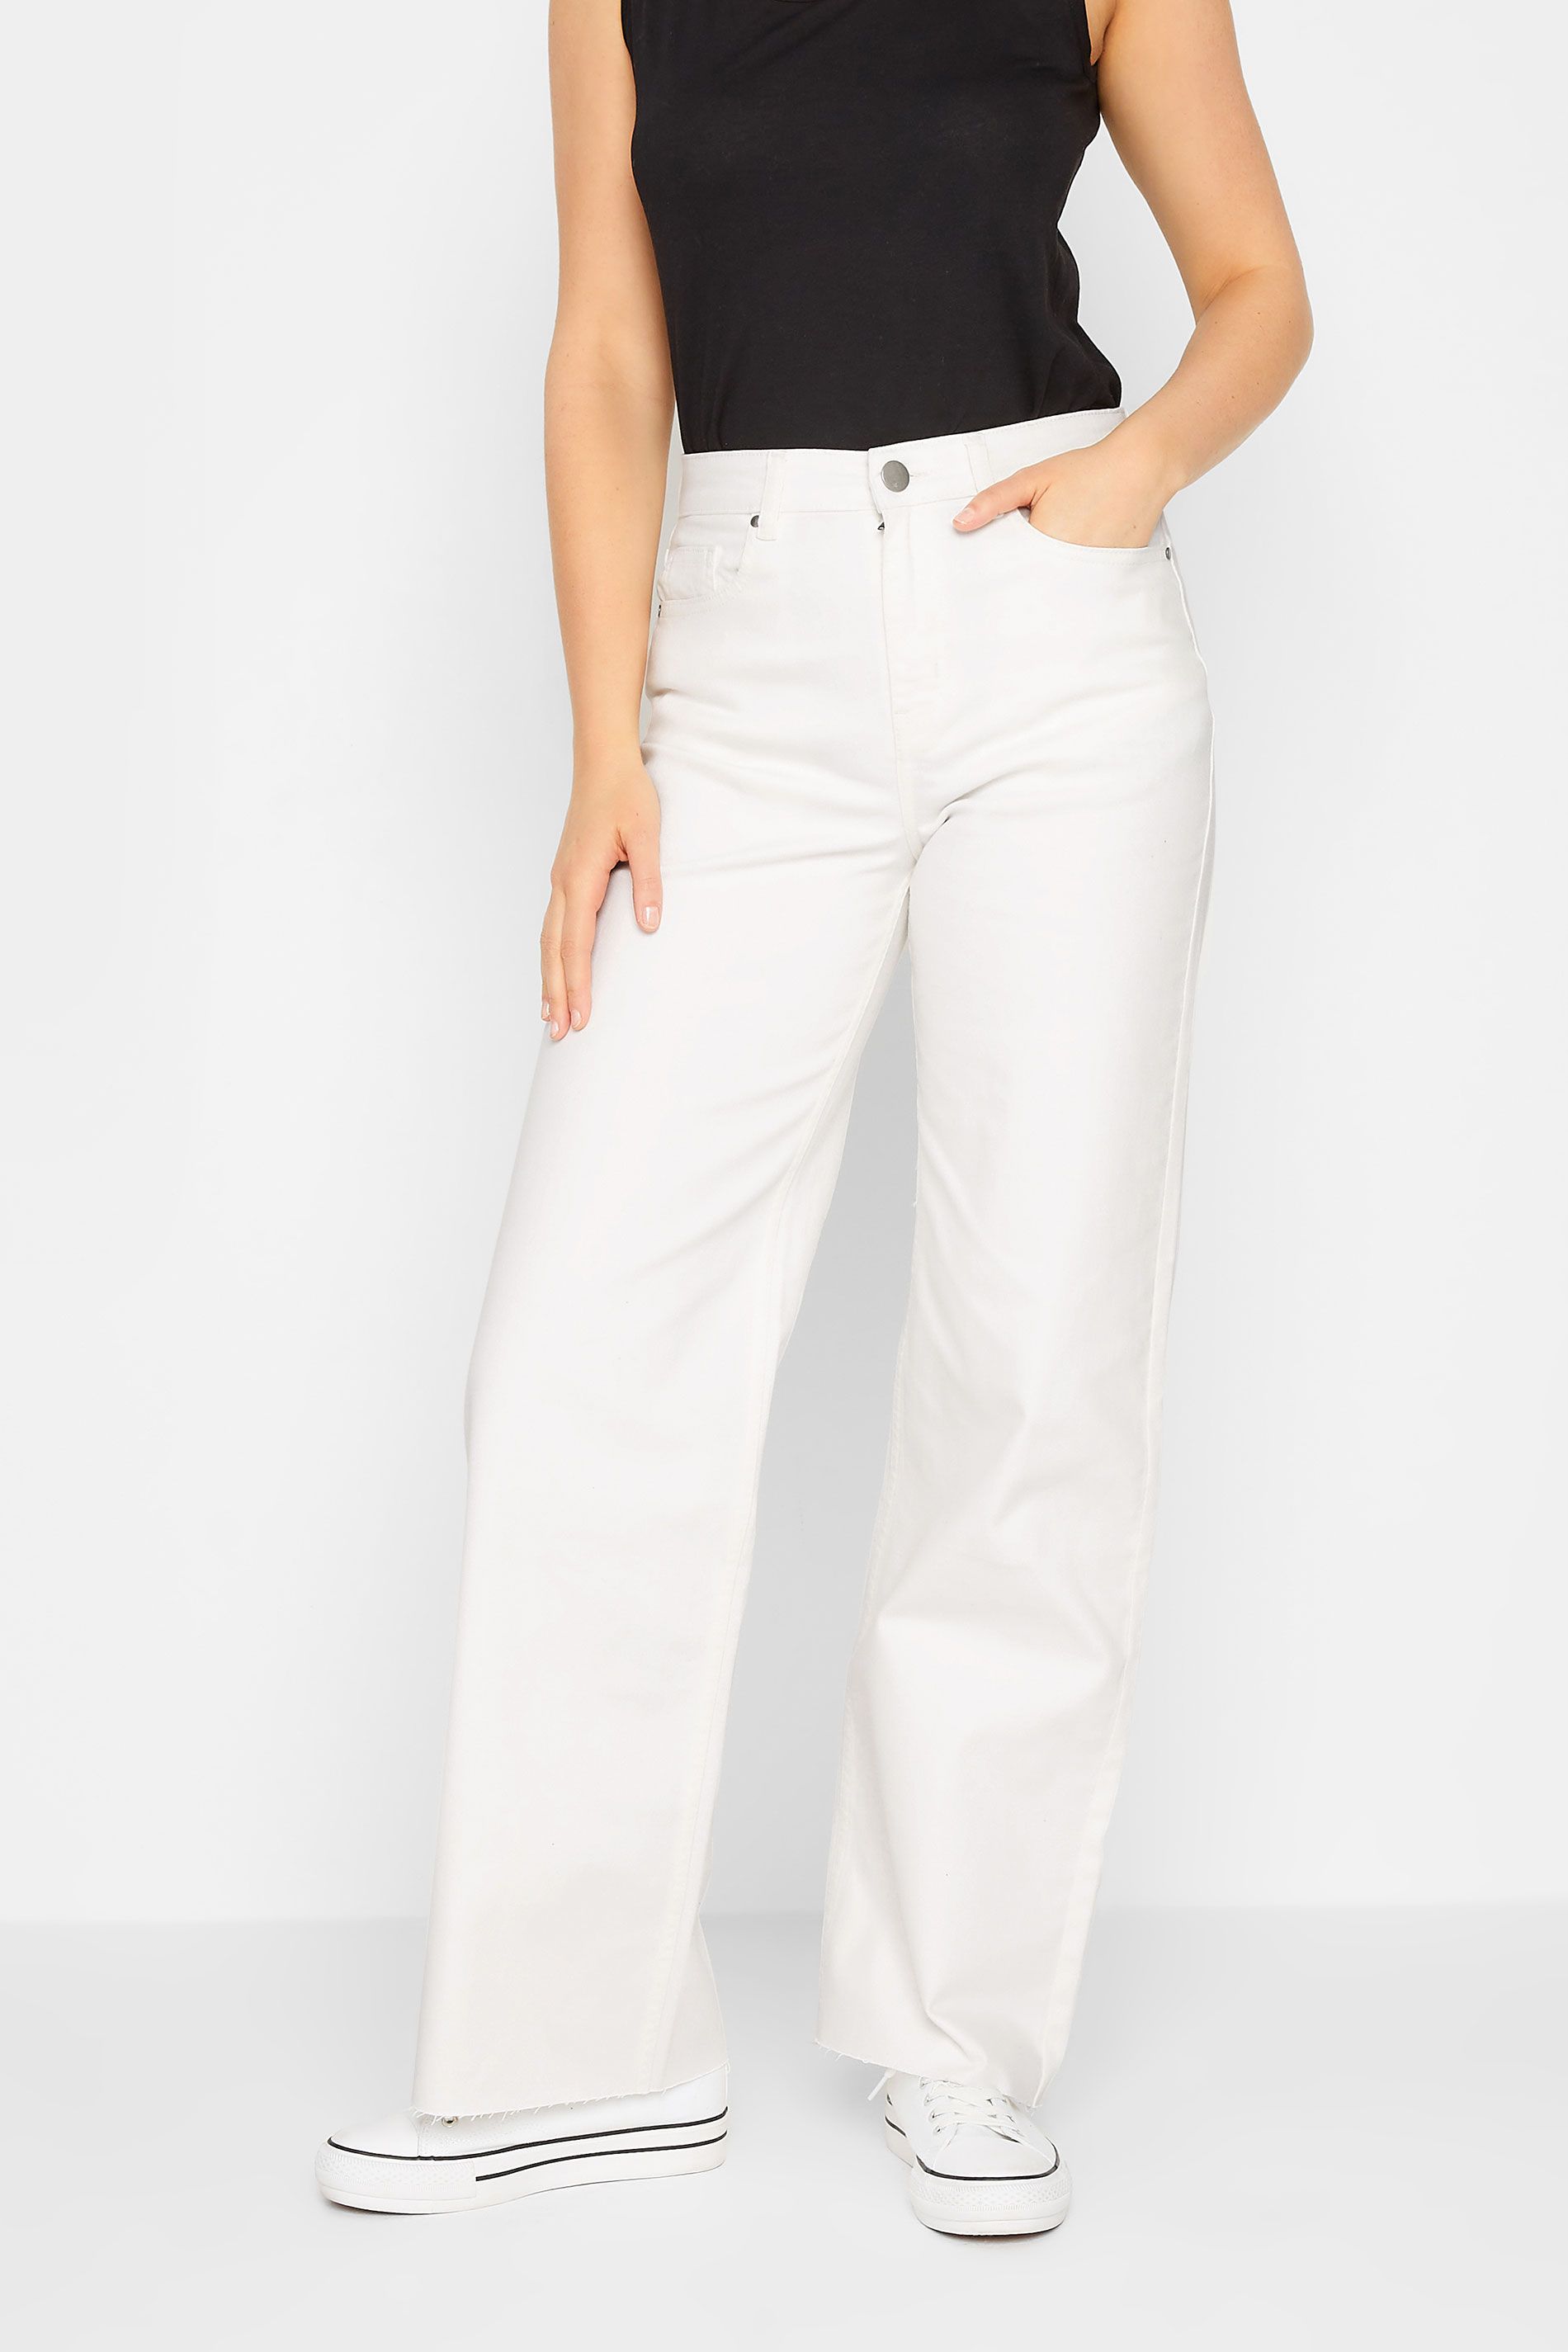 LTS Tall White Stretch Wide Leg Jeans | Long Tall Sally